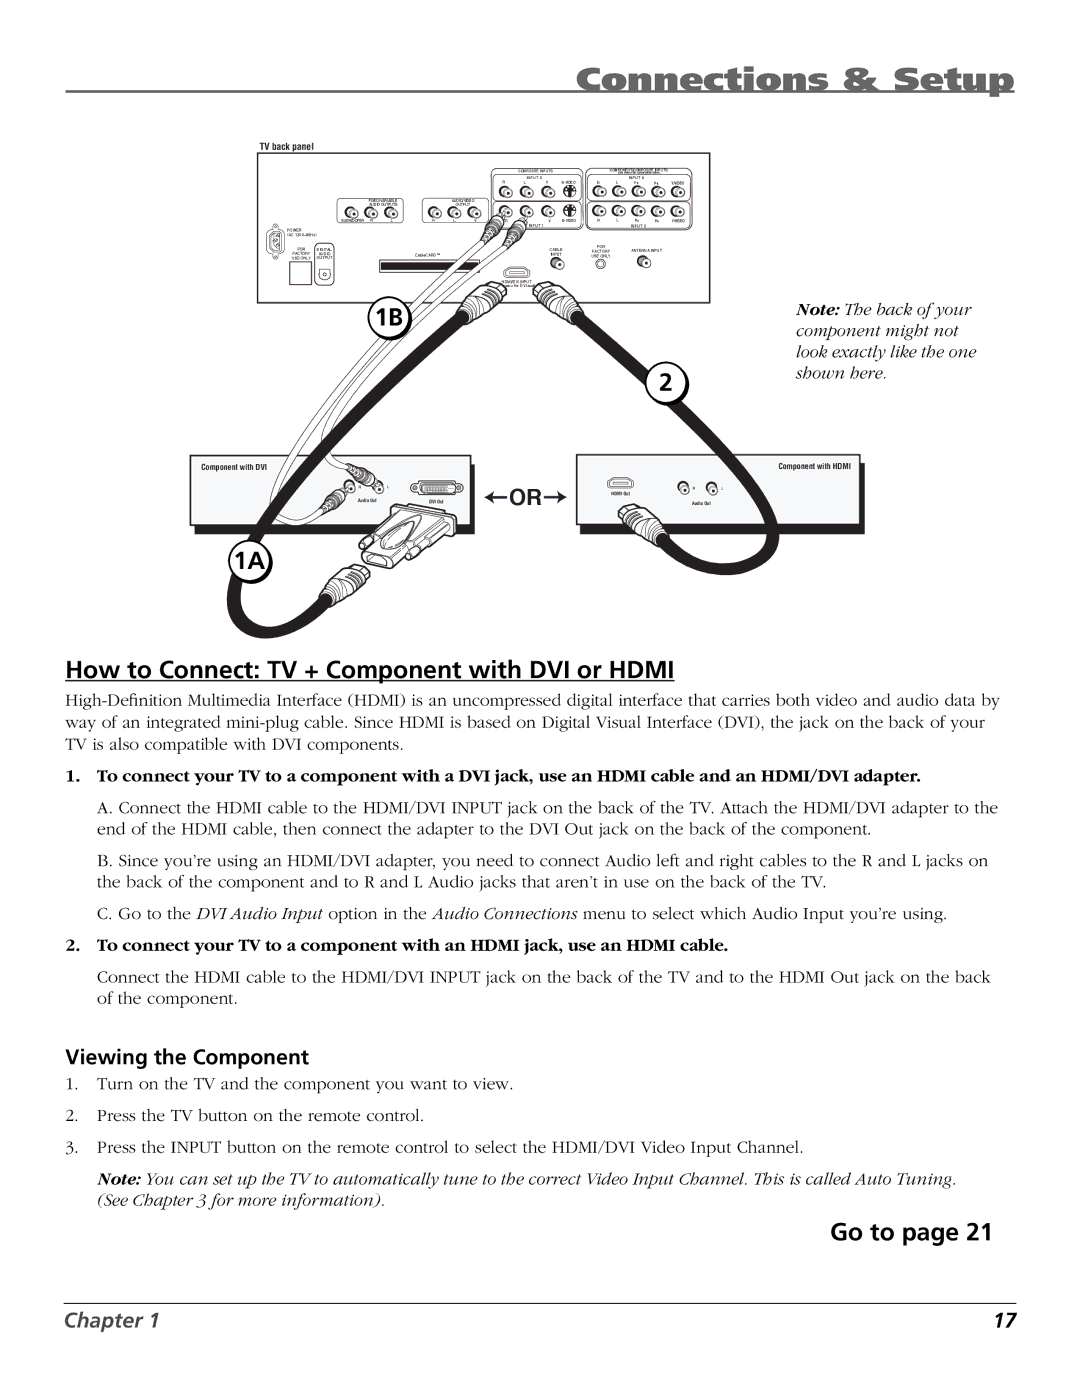 RCA HDTV manual How to Connect TV + Component with DVI or Hdmi, Viewing the Component 